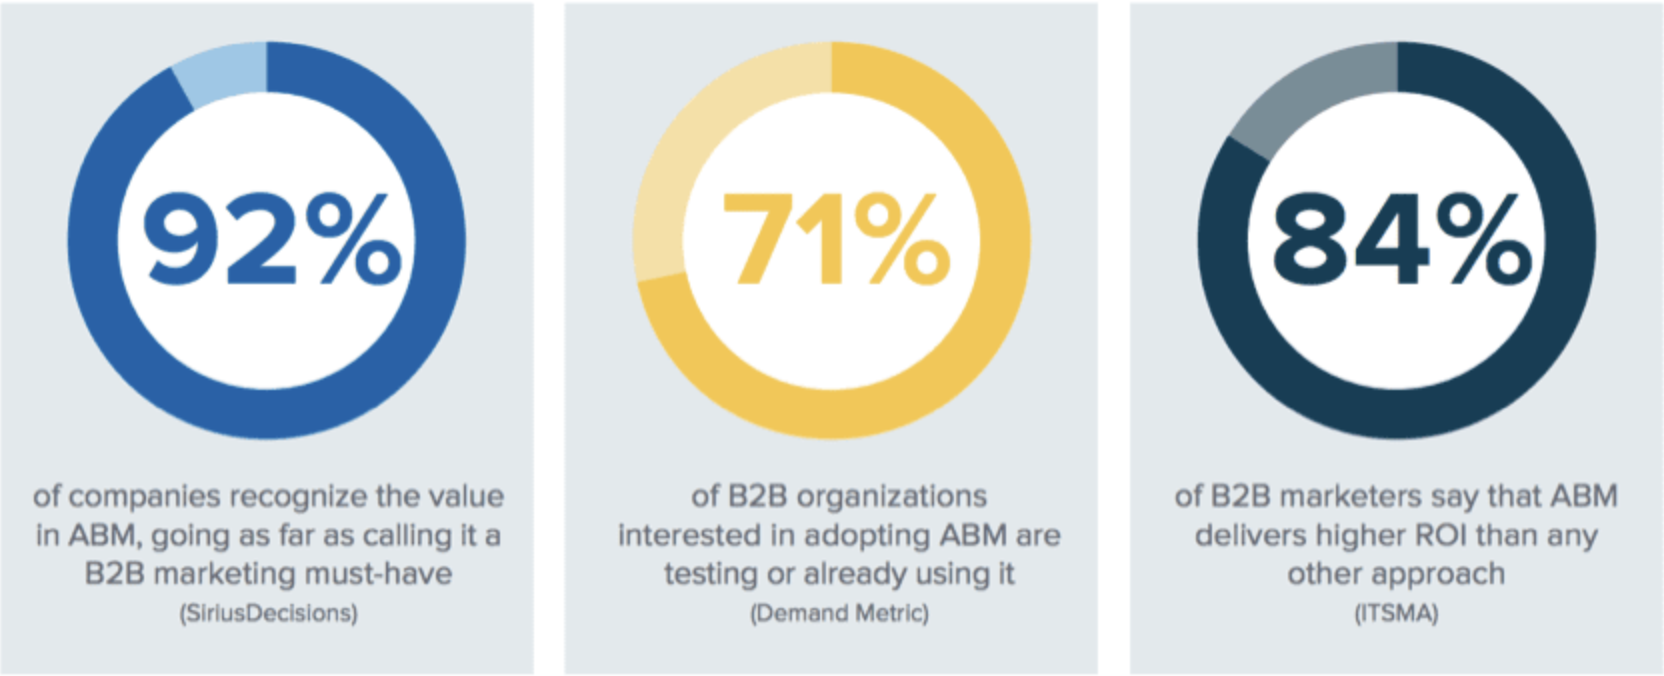 Recent research shows ABM to be a ‘must have’, with the majority of companies testing or using the strategy with claims it delivers a higher ROI than any other approach.